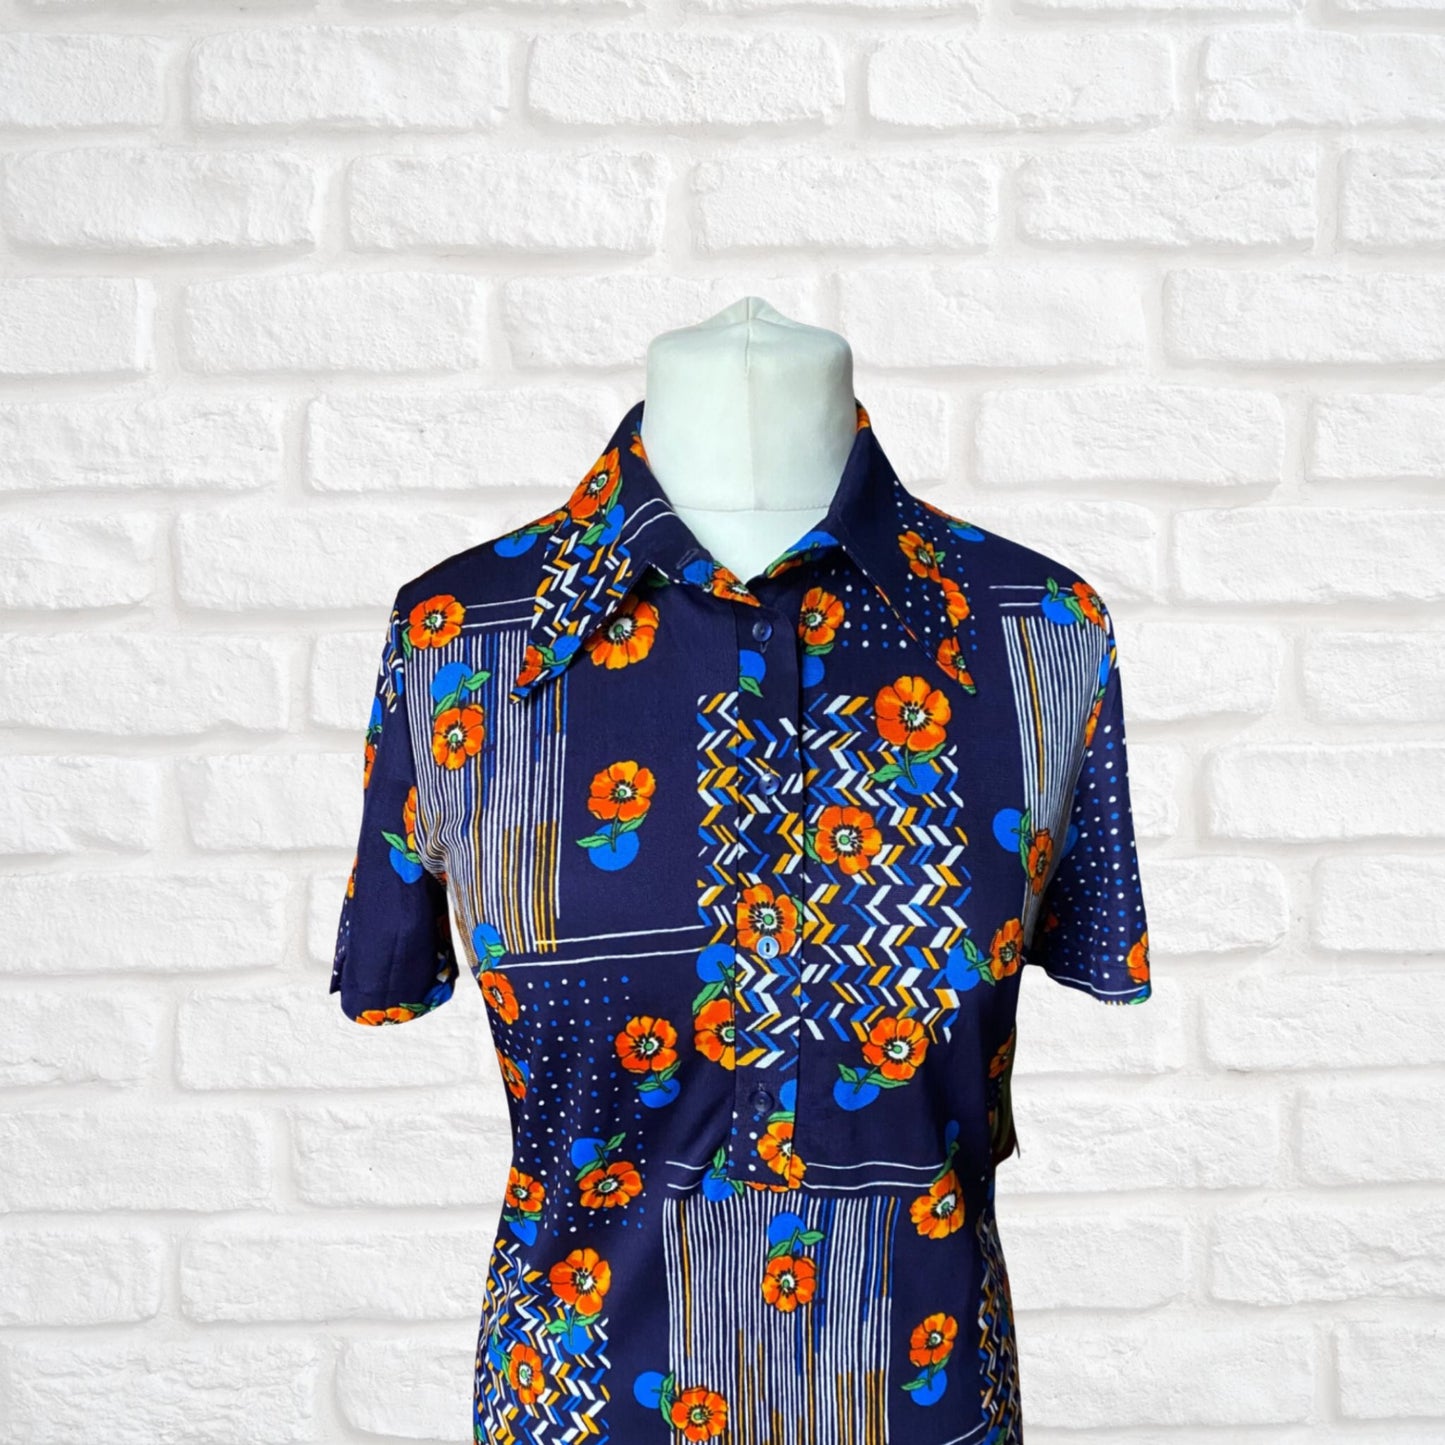 70s blue and orange floral mini dress .Approx UK size 12